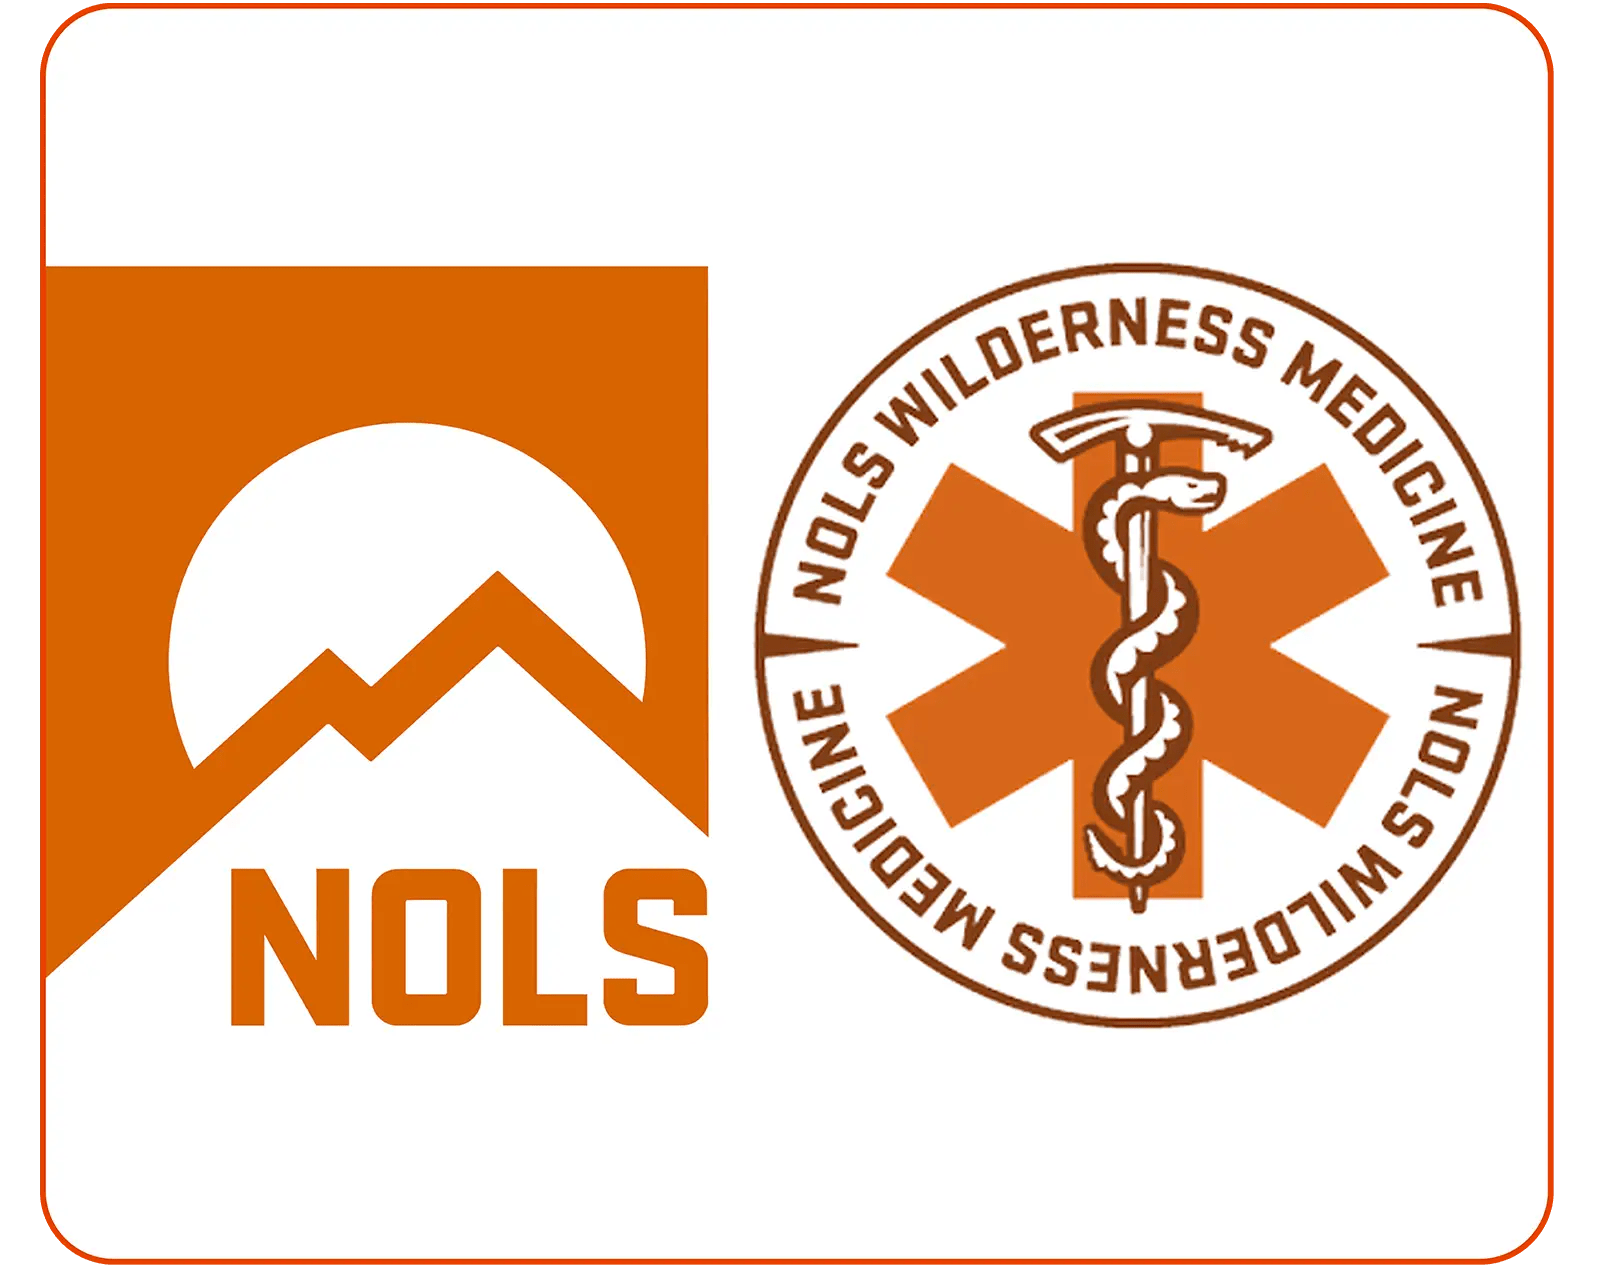 NOLS Wilderness First Responder - Articles In Common